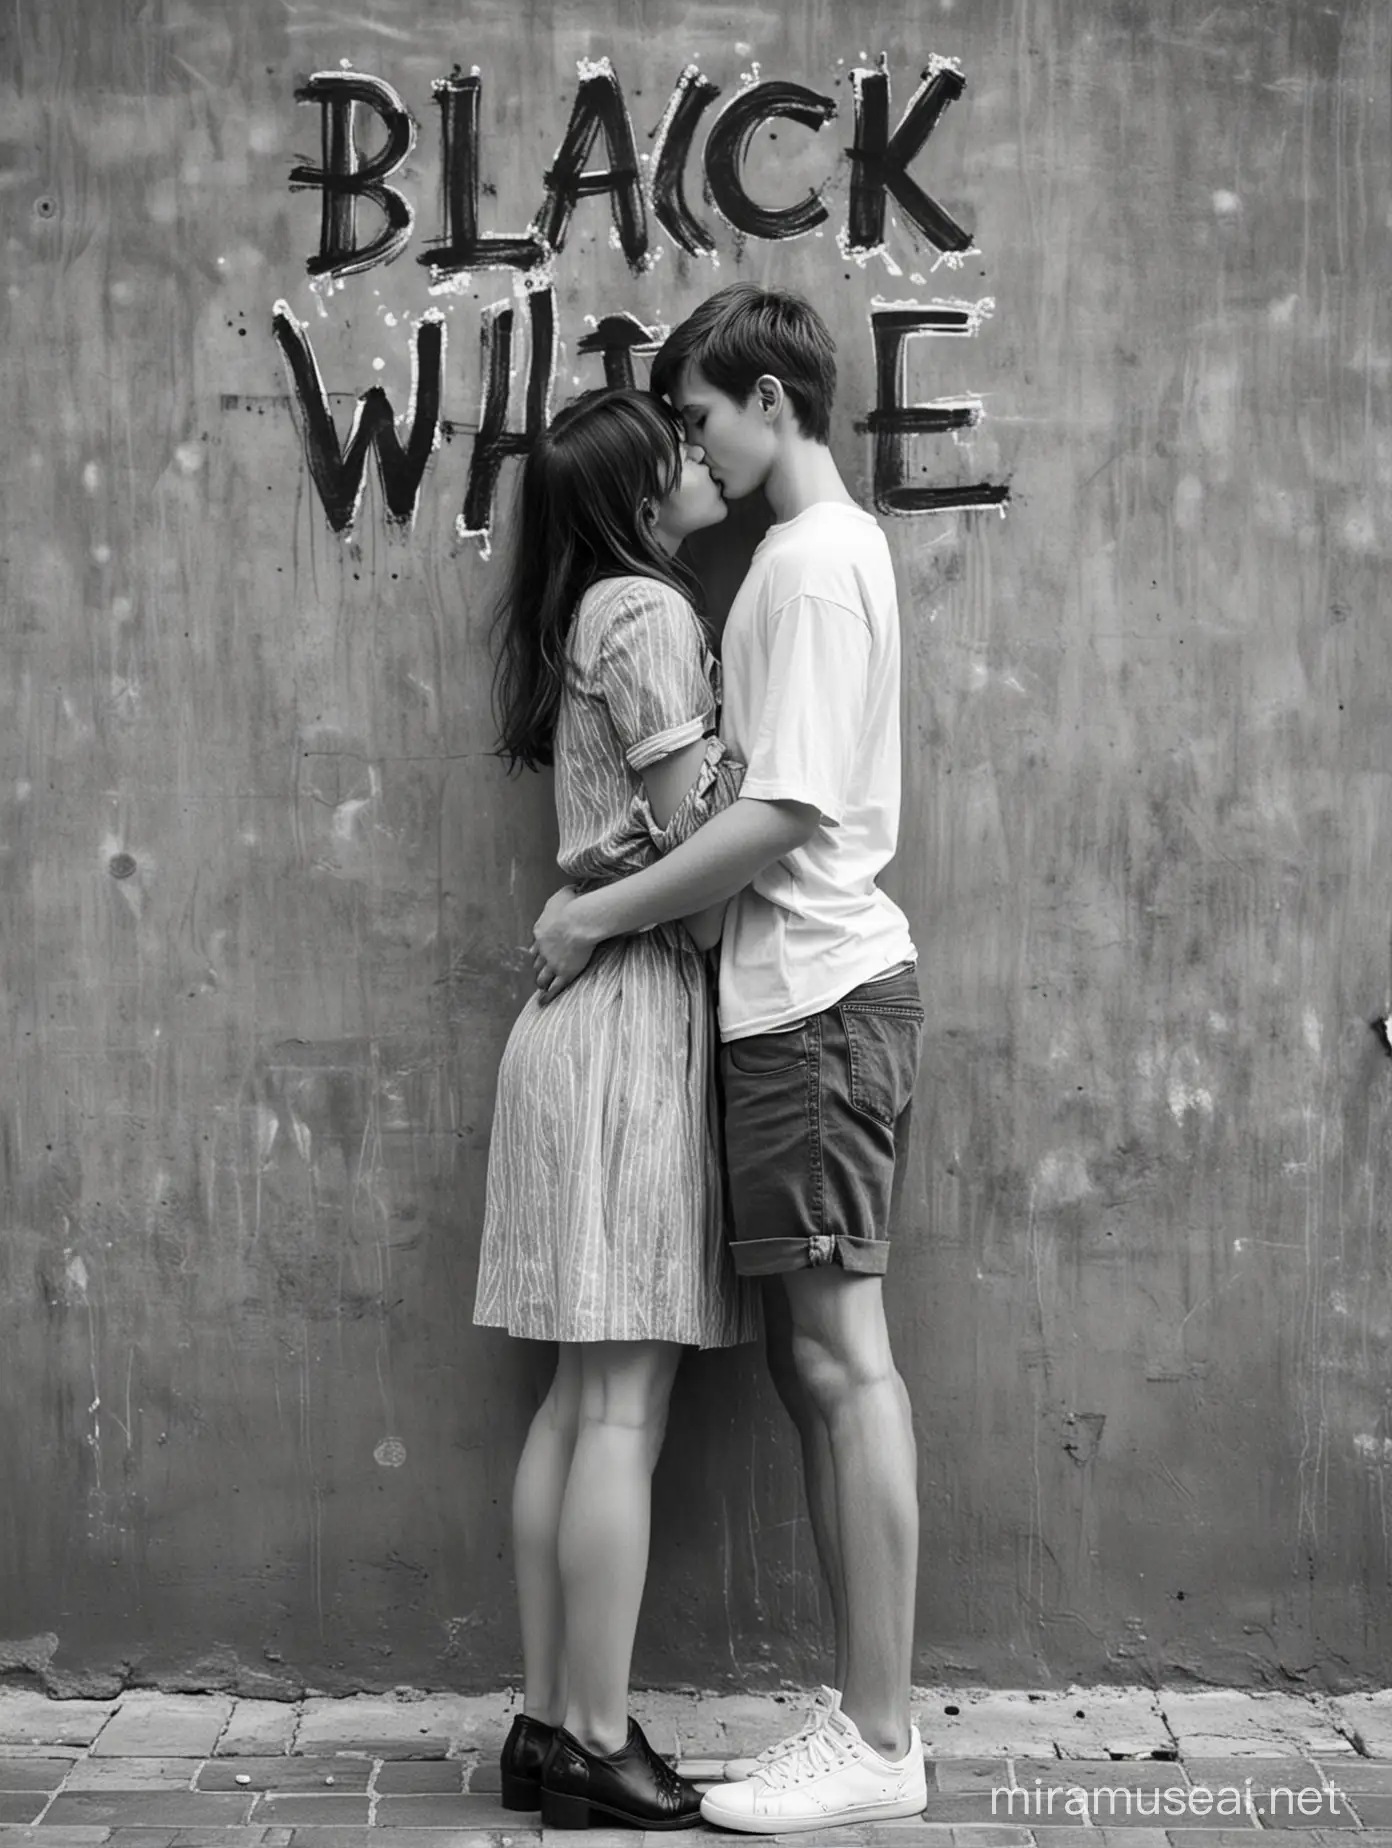 A boy and a girl in love are kissing in front of a wall with "BLACK WHITE" written on it (Please write BLACK WHITE correctly(